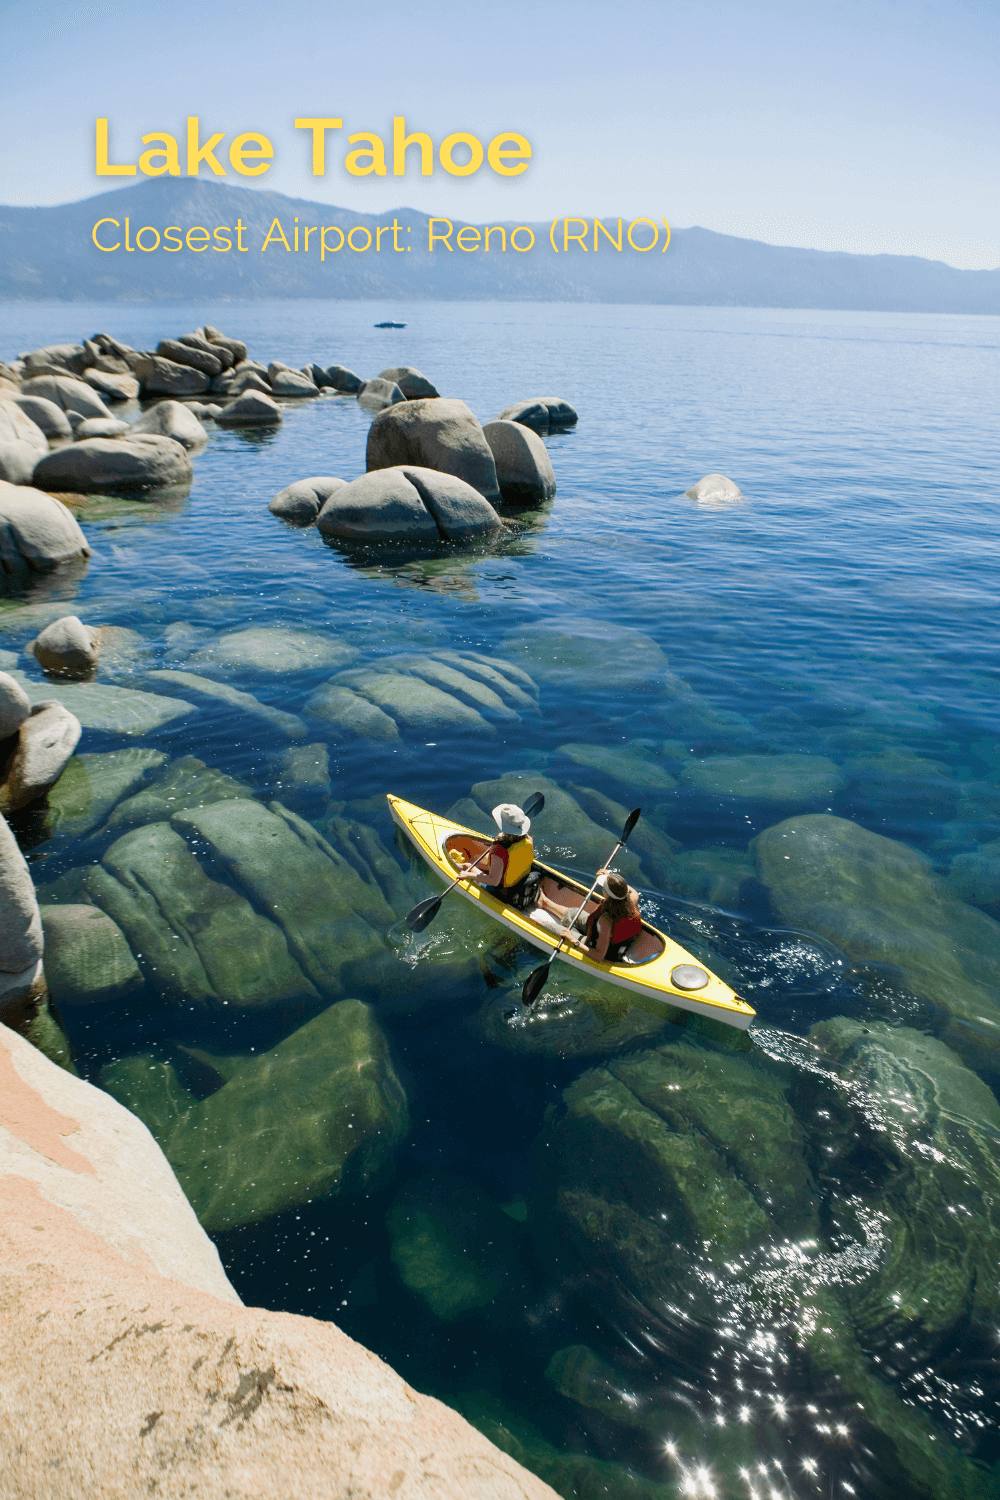 Photo of two kayakers paddling in a yellow kayak around Lake Tahoe.  The water is very clear and reveals large rounded boulders under the flowing water.  The other side of the lake is faintly visible under the blue sky. 